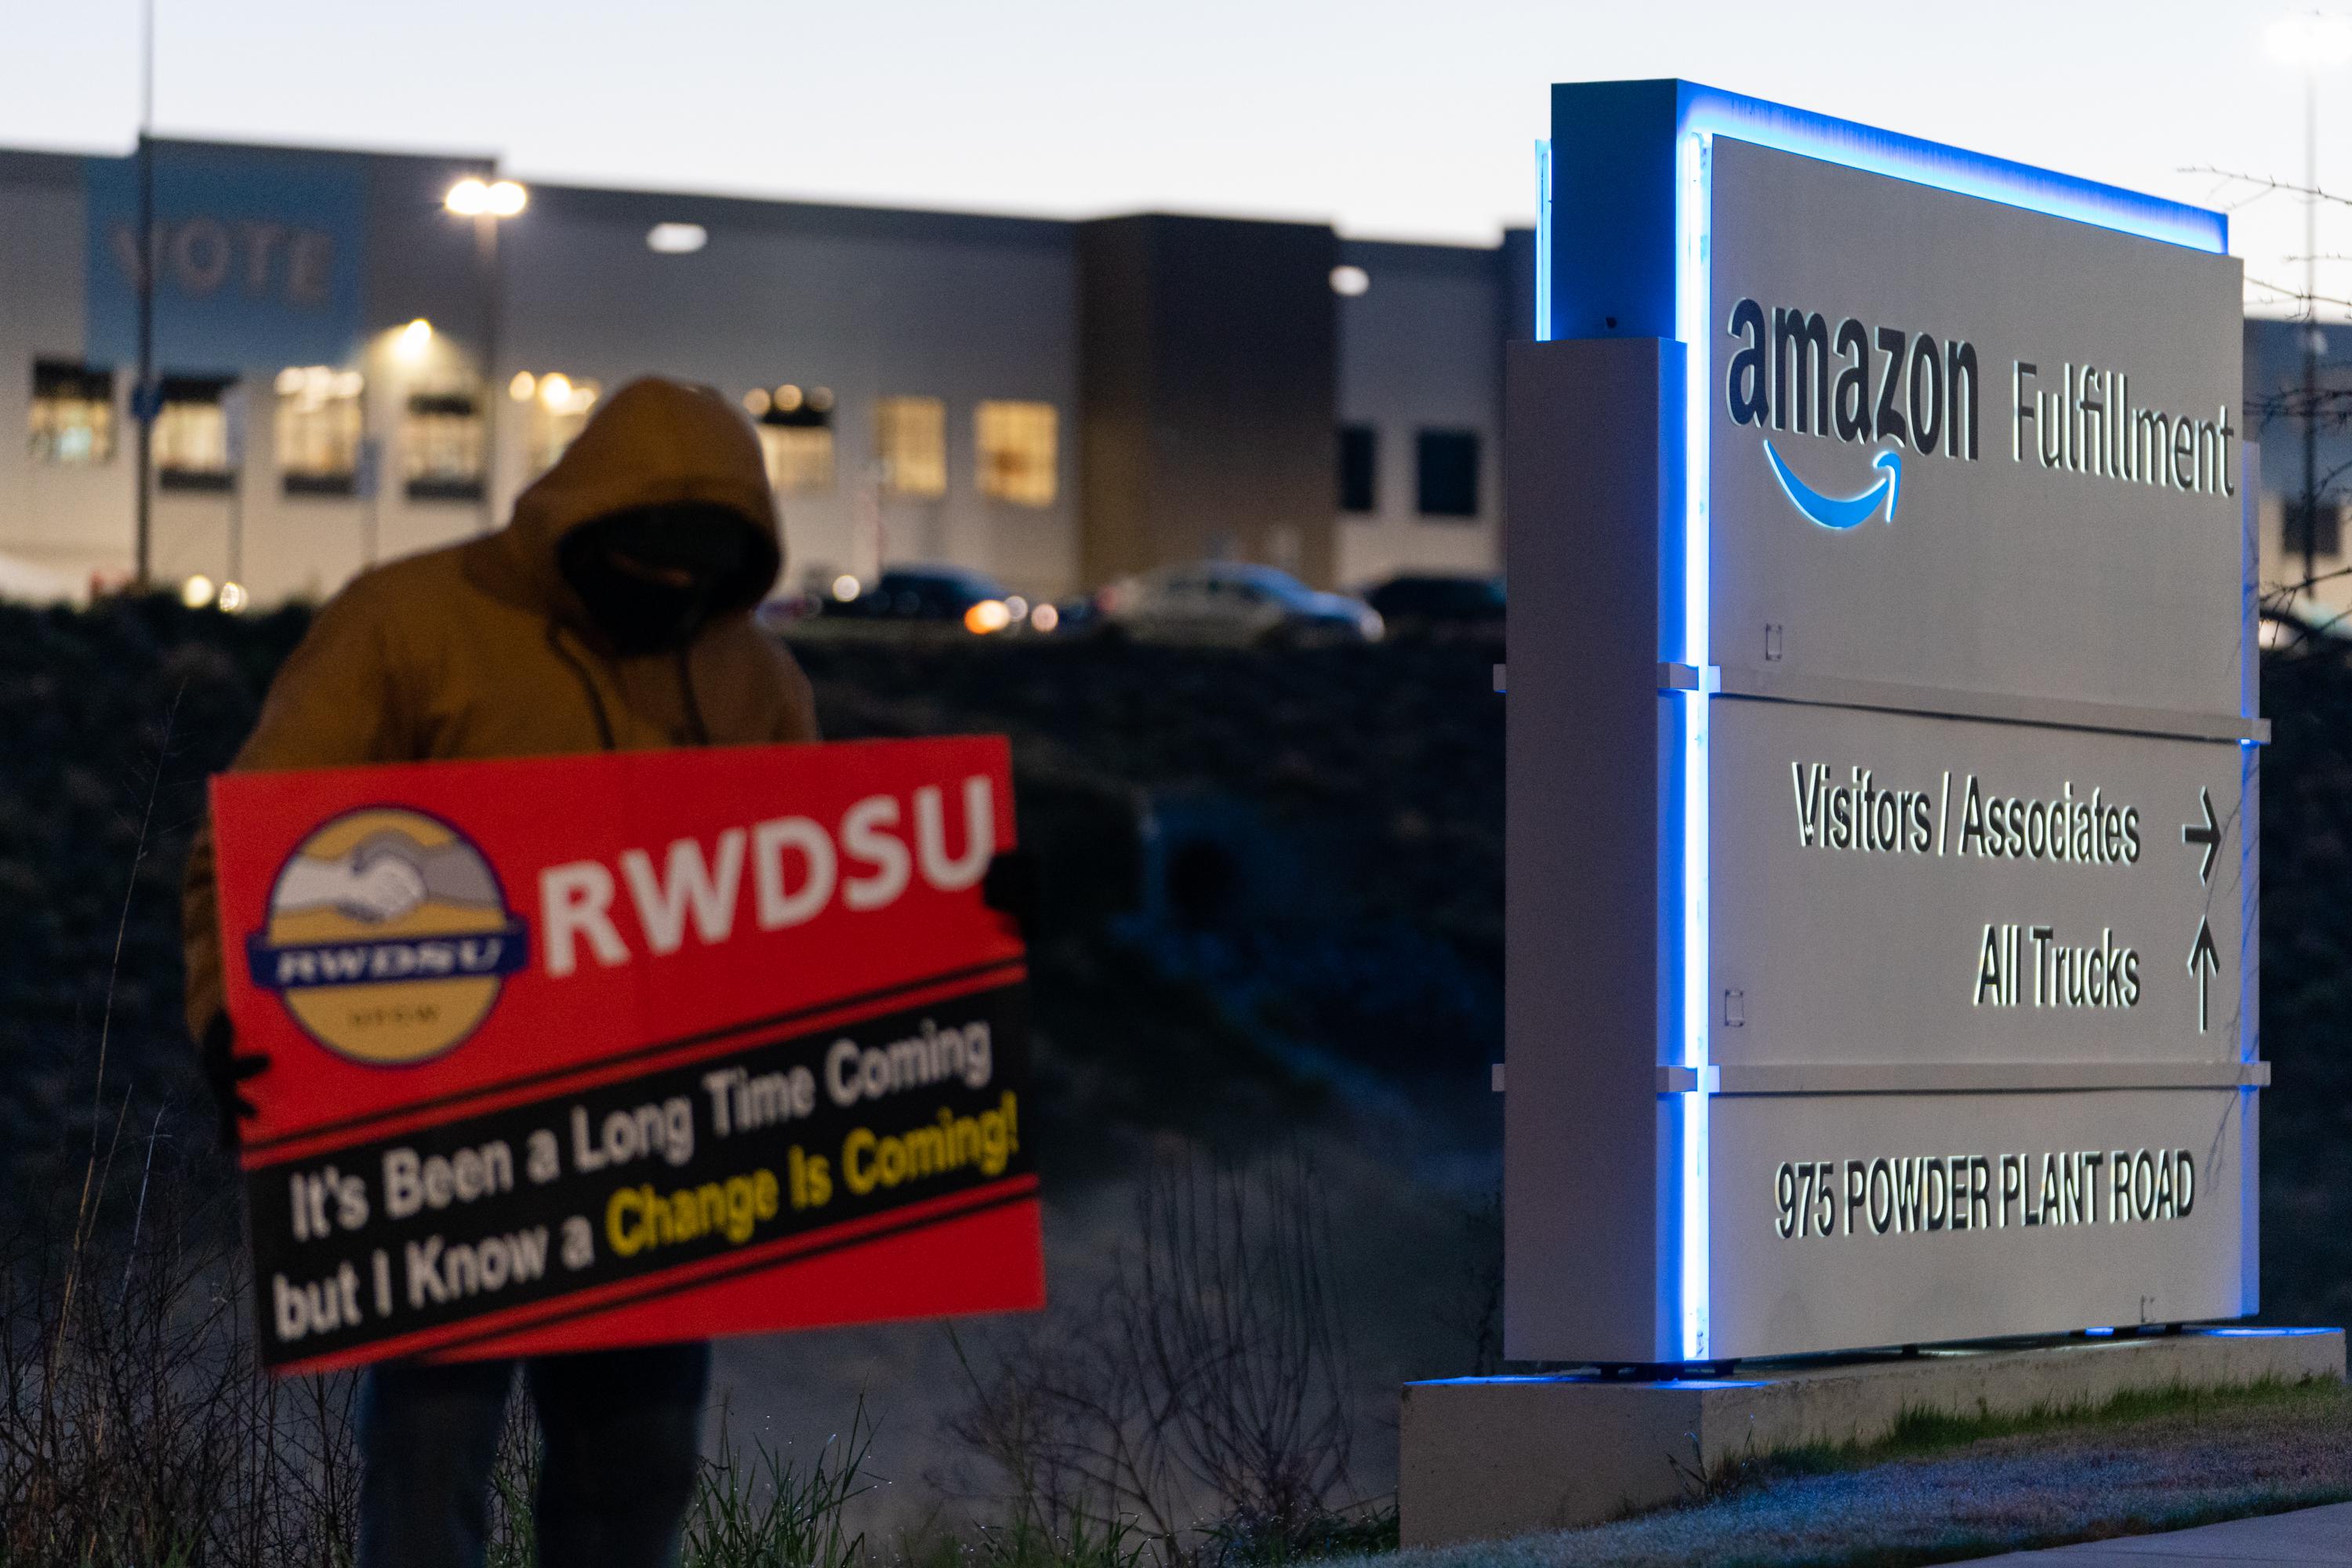 An RWDSU union rep holds a sign outside the Amazon fulfillment warehouse in Bessemer.